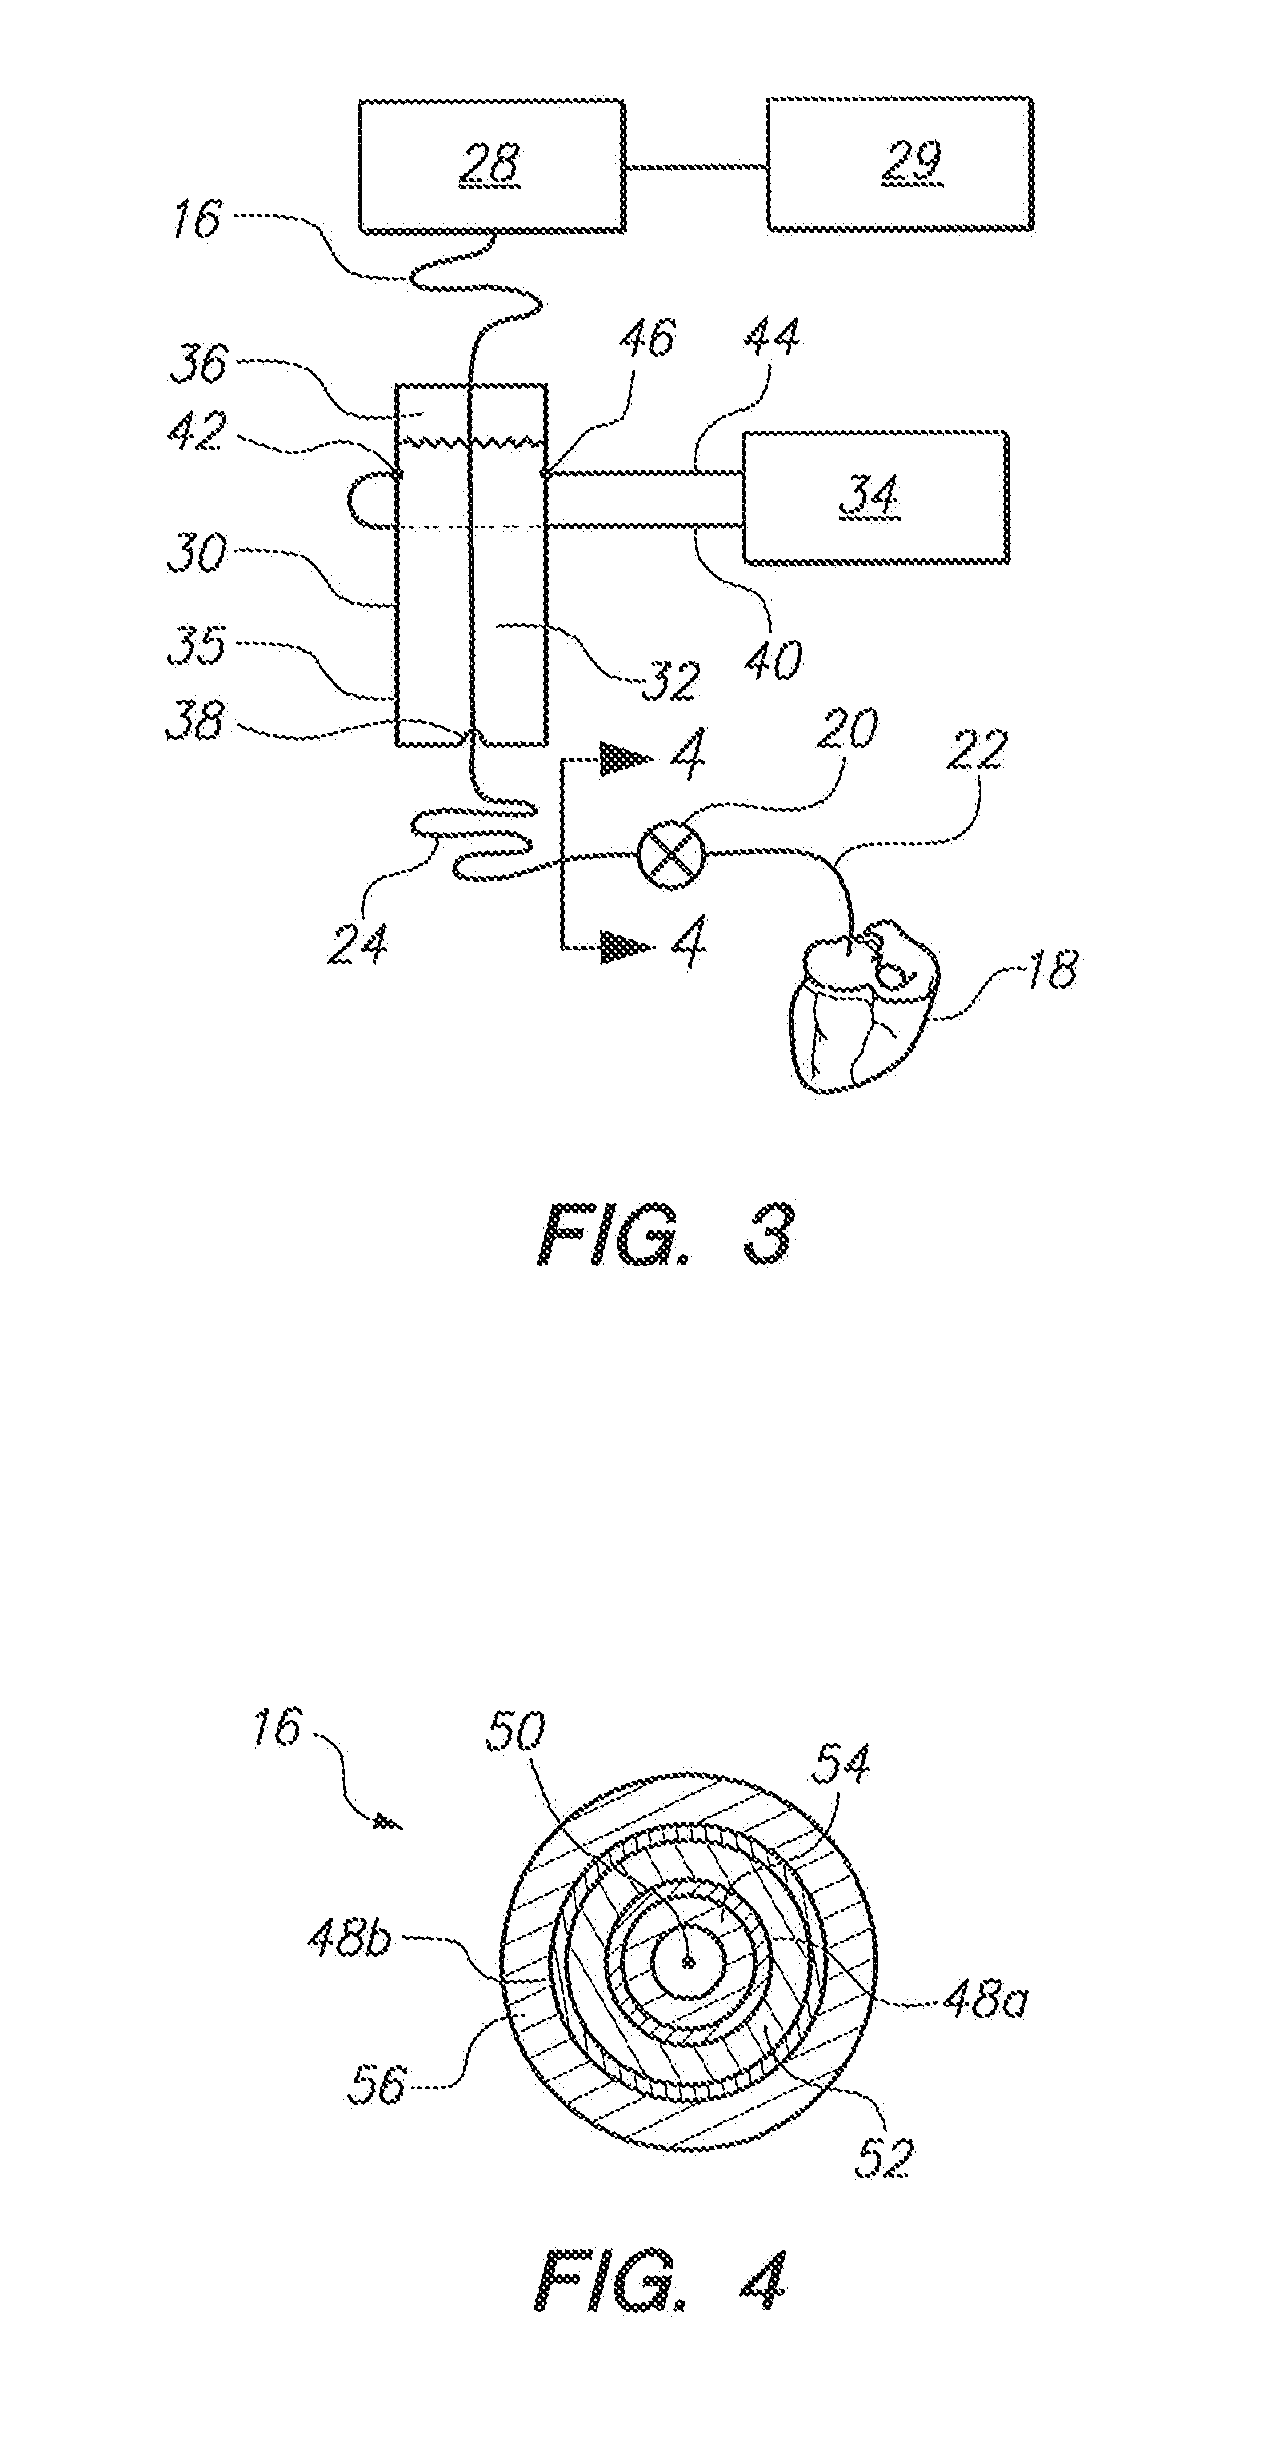 Extracorporeal Unit for Inspecting the Insulation of an Electrical Wire of an Implanted Medical Device